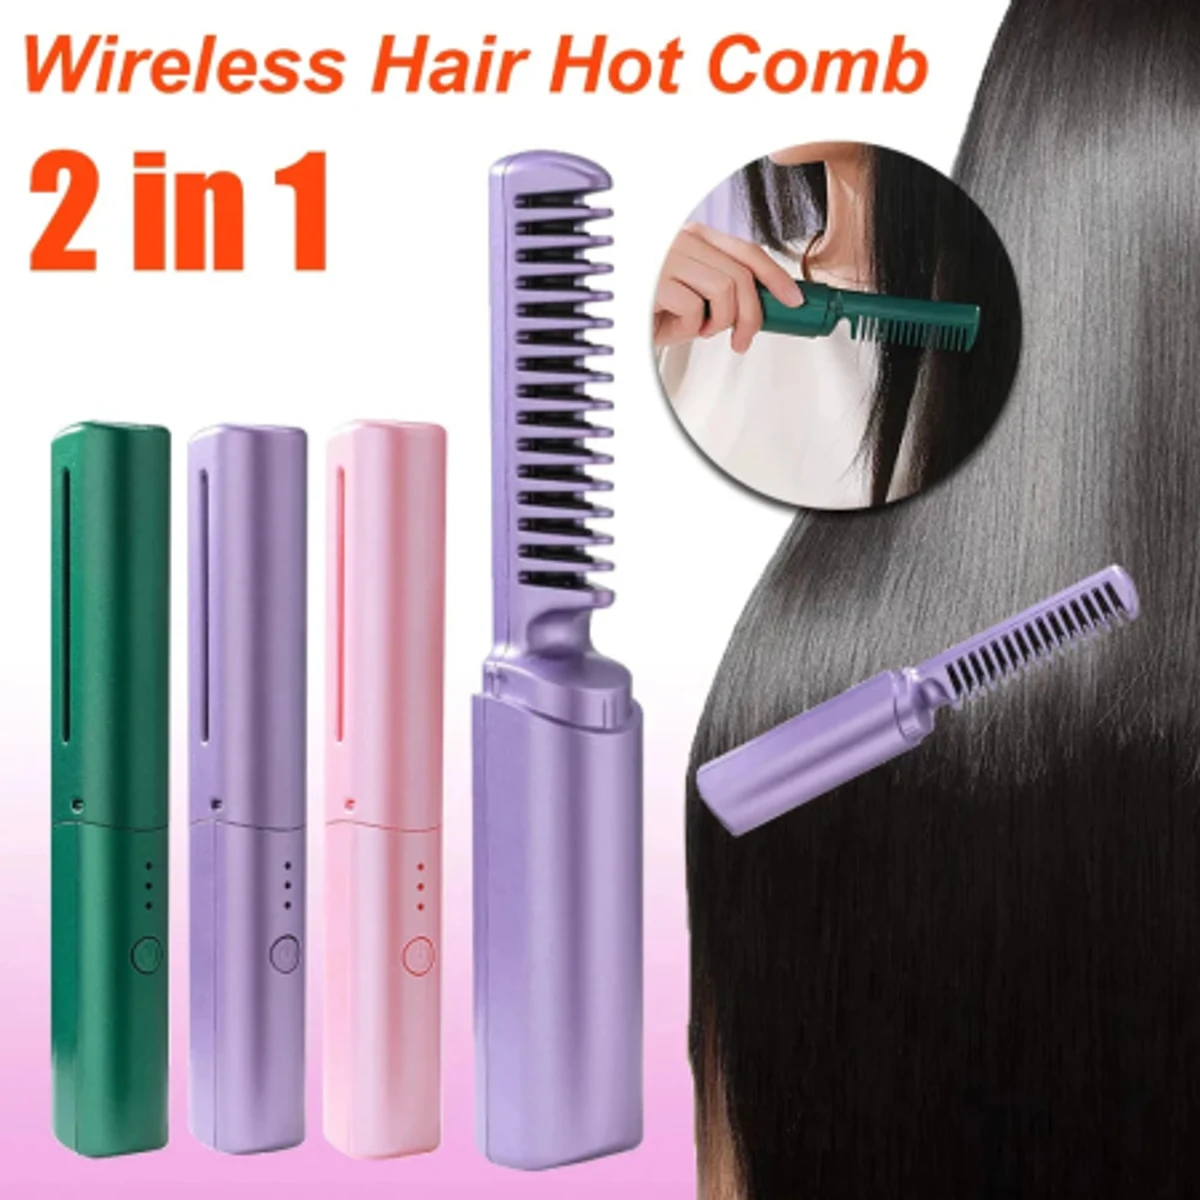 2-in-1 Mini Portable Wireless Straight Hair Comb for Curly Hair & Beard